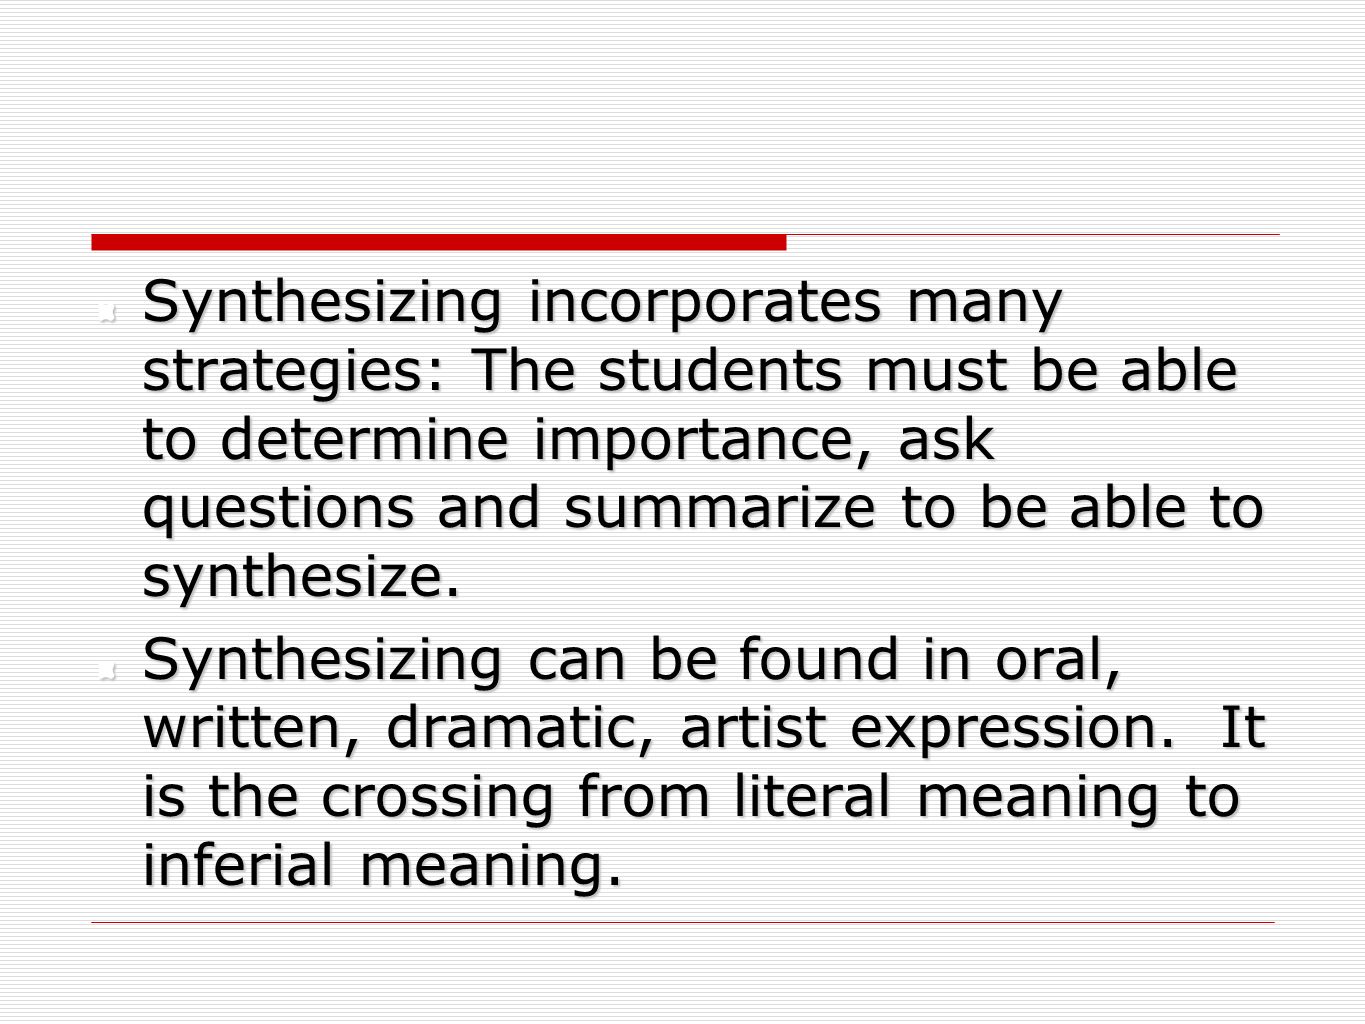 Synthesizing incorporates many strategies: The students must be able to determine importance, ask questions and summarize to be able to synthesize.